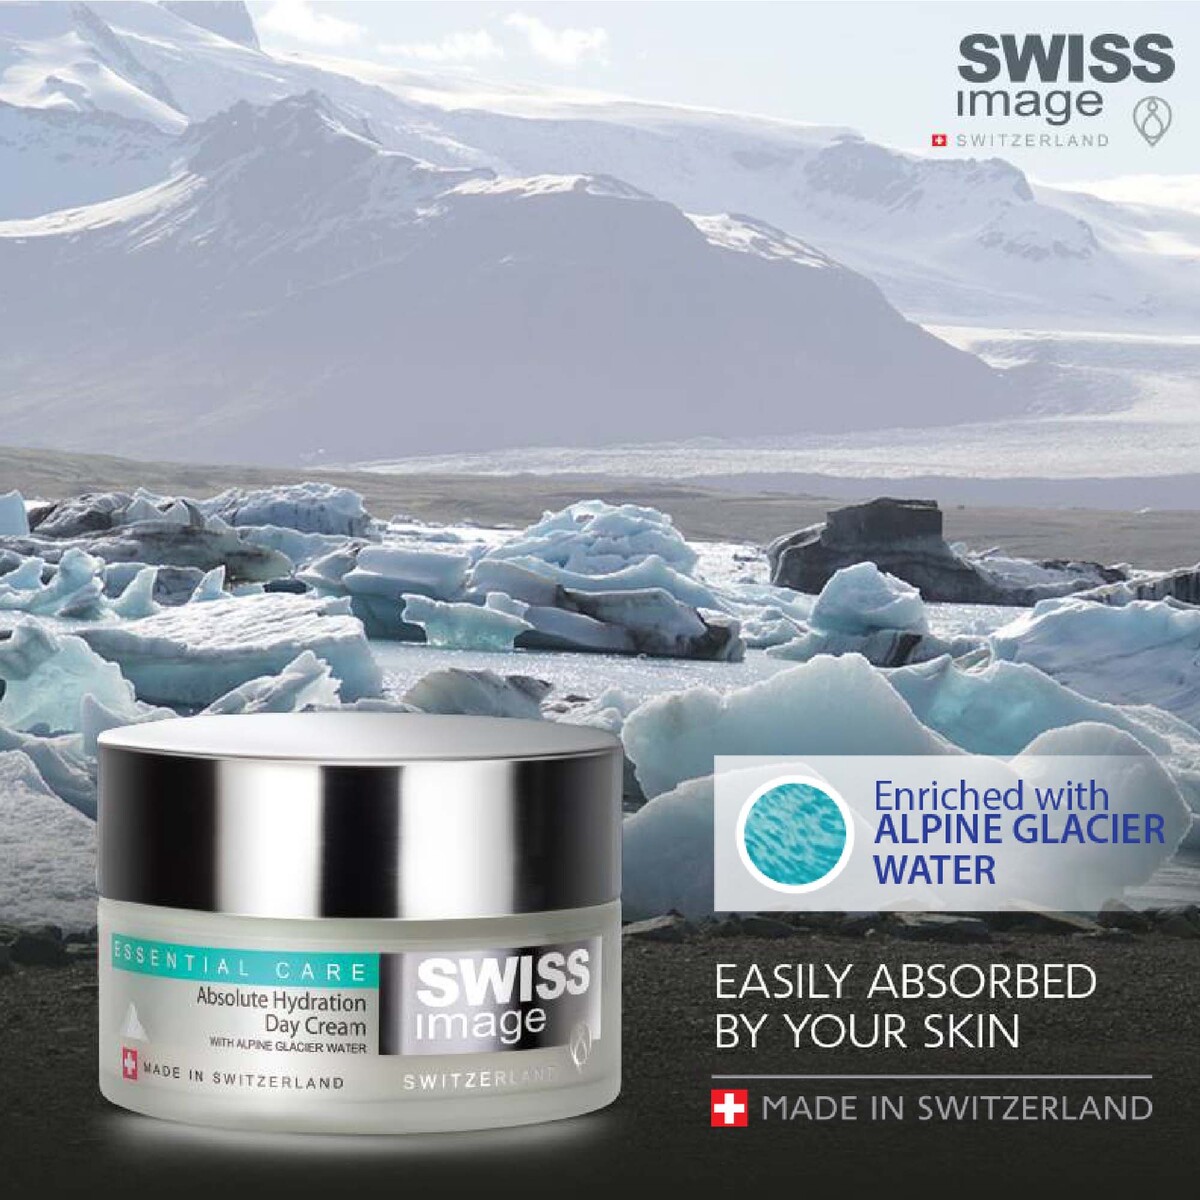 Swiss Image Essential Care Absolute Hydration Day Cream 50 ml